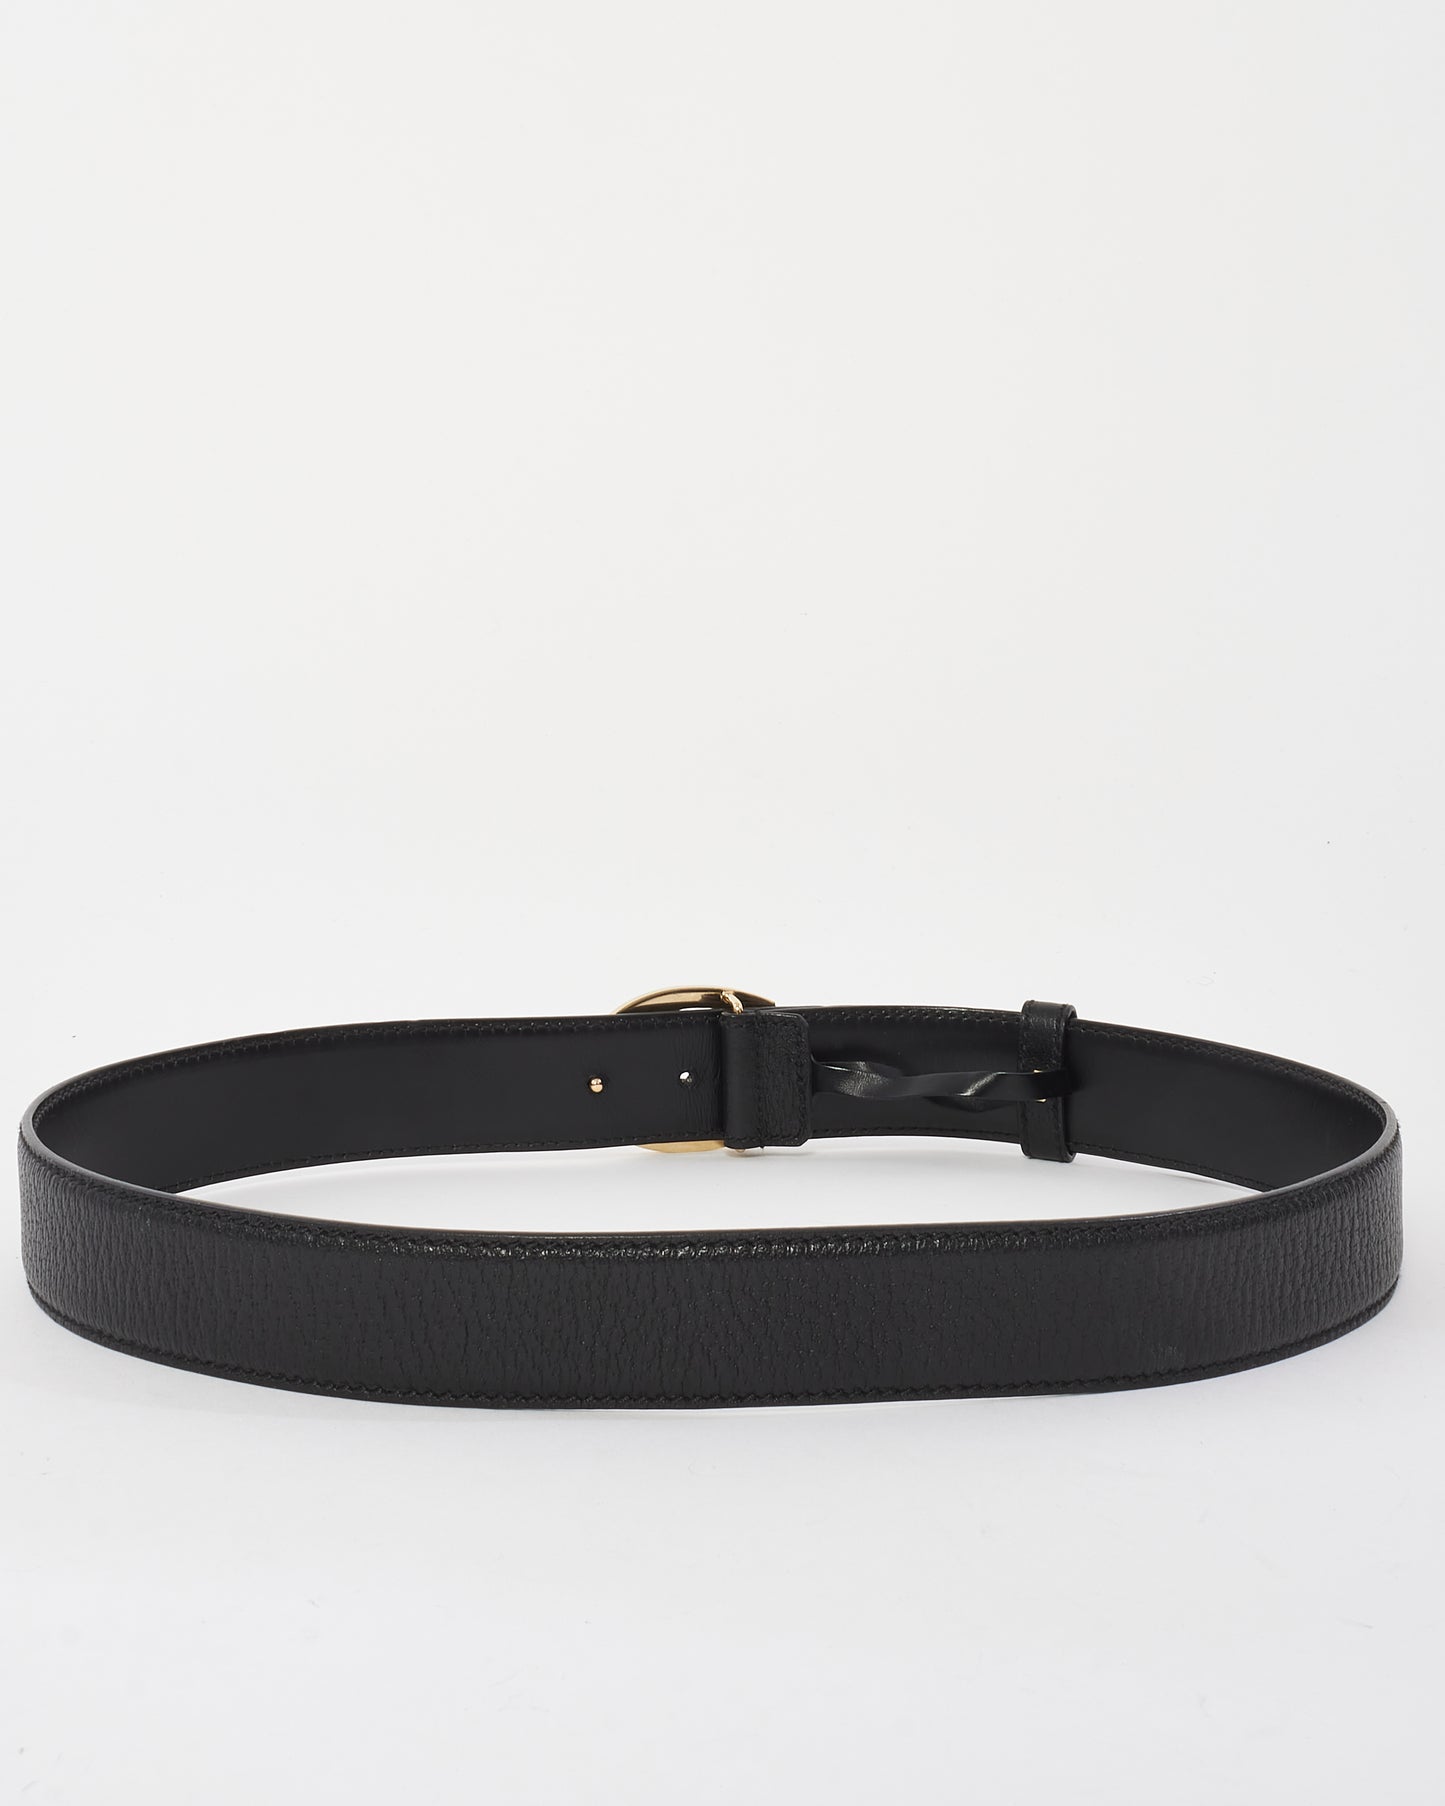 Gucci Black Grained Leather Gold G Buckle Belt - 85/34